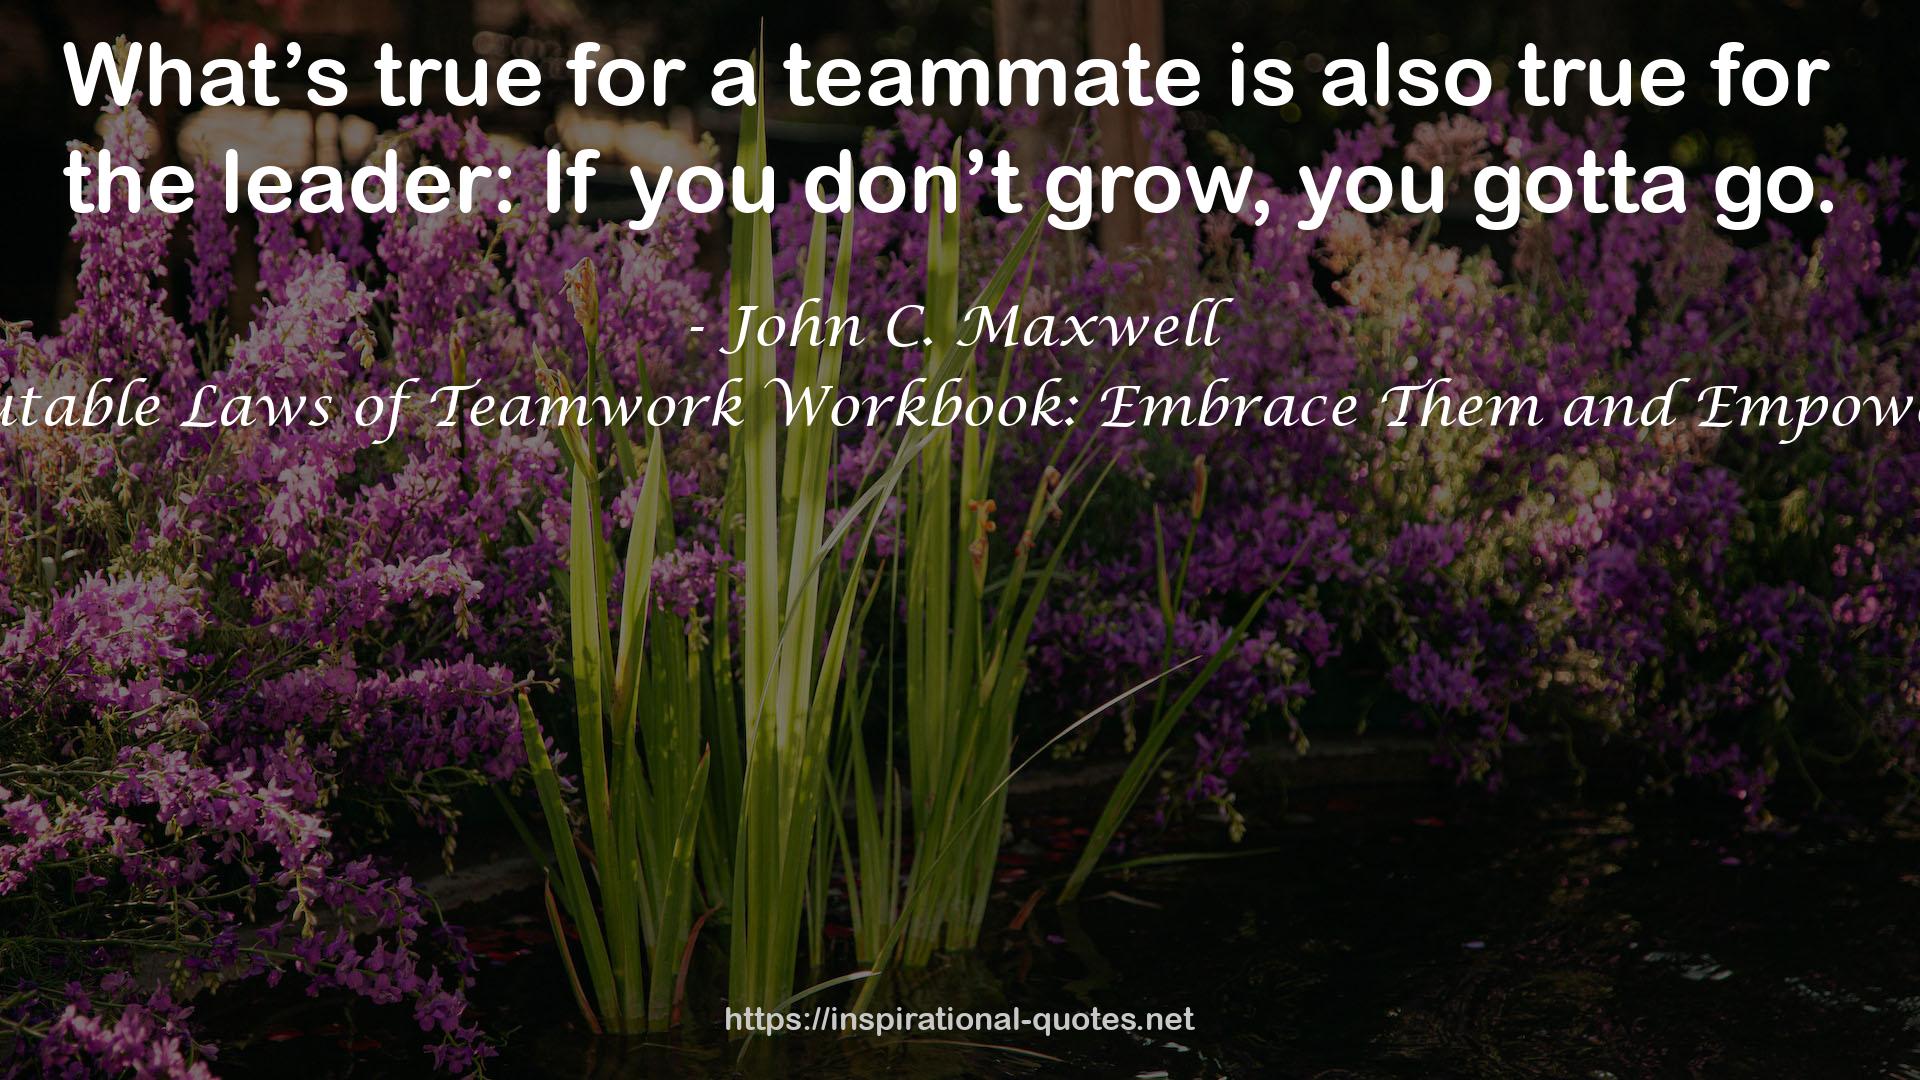 The 17 Indisputable Laws of Teamwork Workbook: Embrace Them and Empower Your Team QUOTES